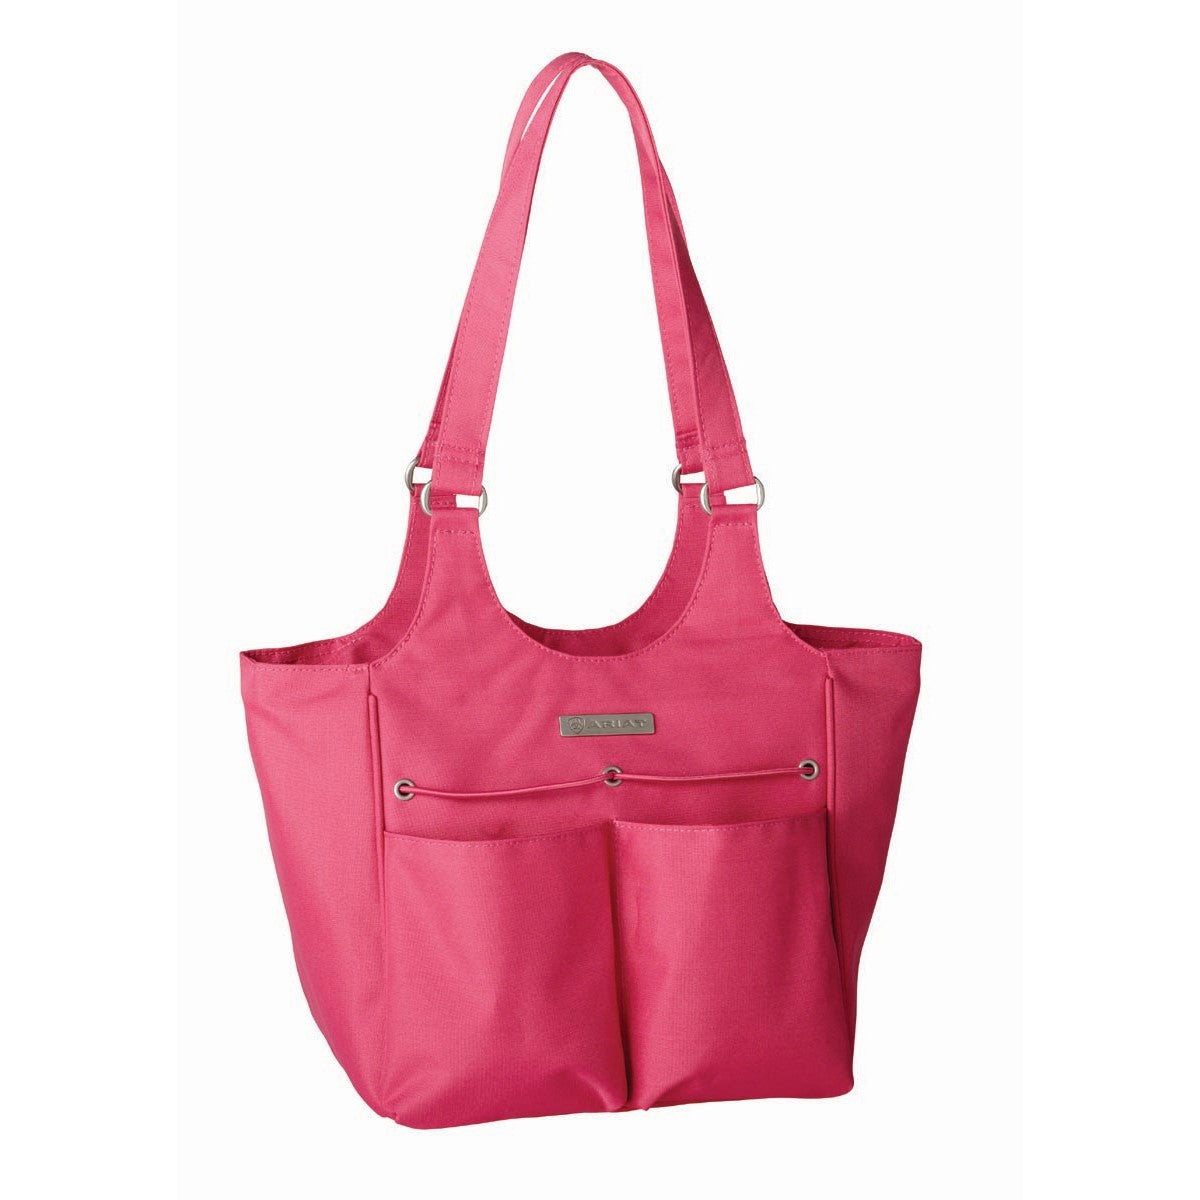 Ariat Ladies Mini Carry All Tote Raspberry Shoulder Bag A10006696